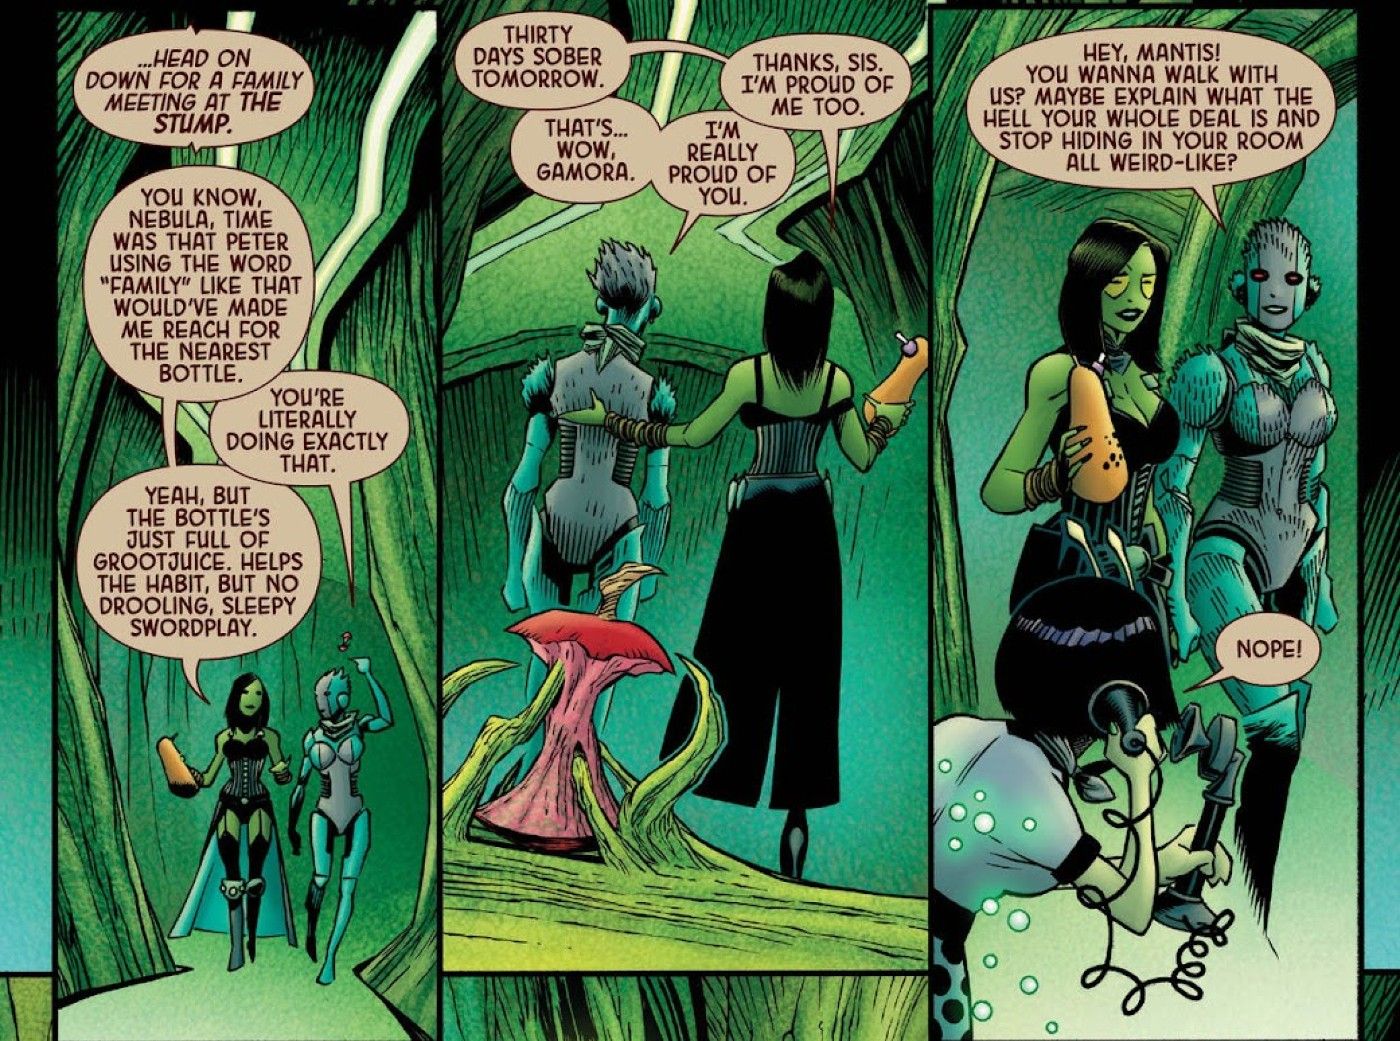 Gamora, Nebula, and Mantis of the Guardians of the Galaxy talk about Groot in Grootspace